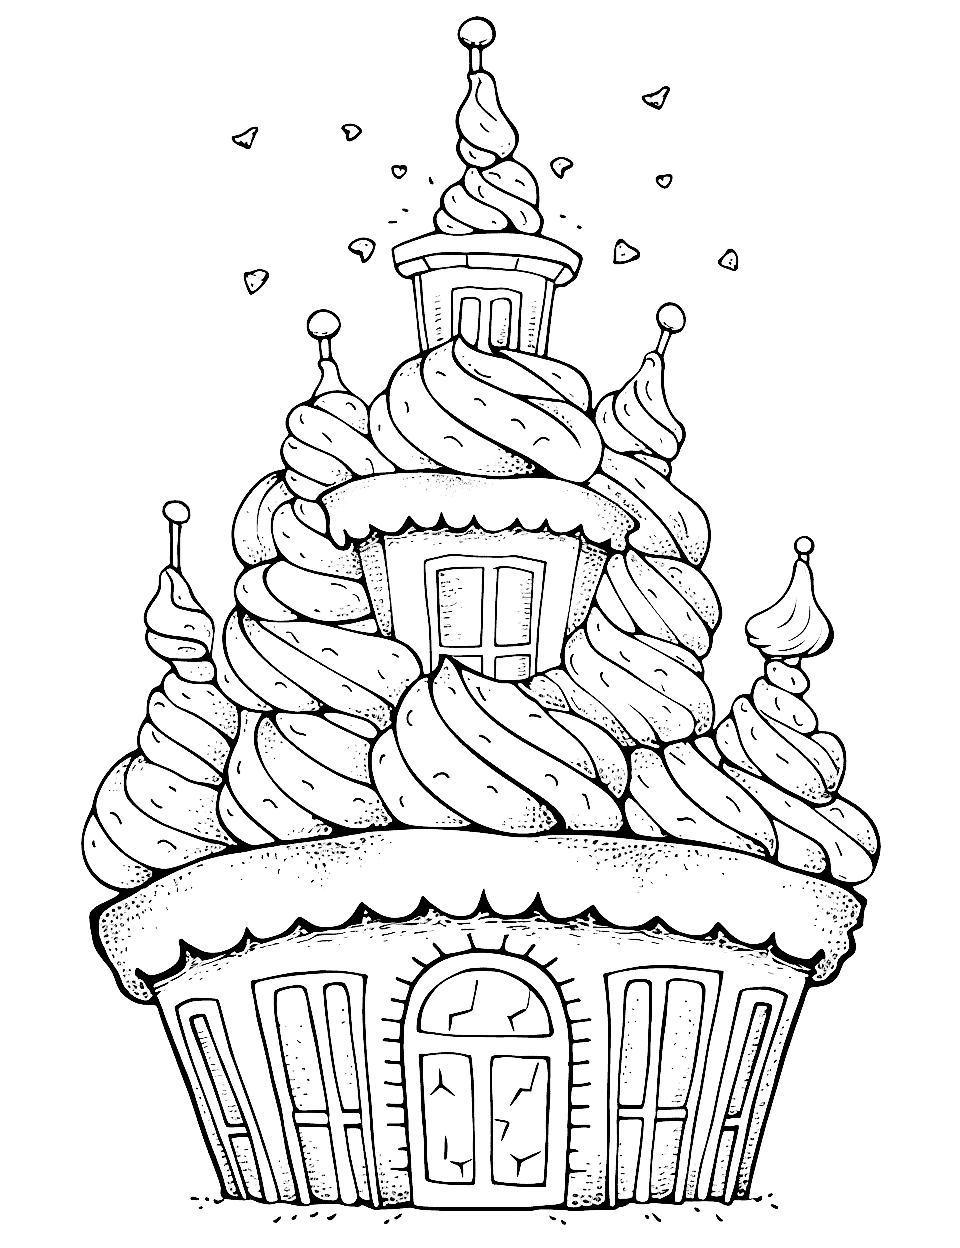 Cupcake Castle Cute Coloring Page - A castle made entirely of cupcakes with frosting and sprinkles.